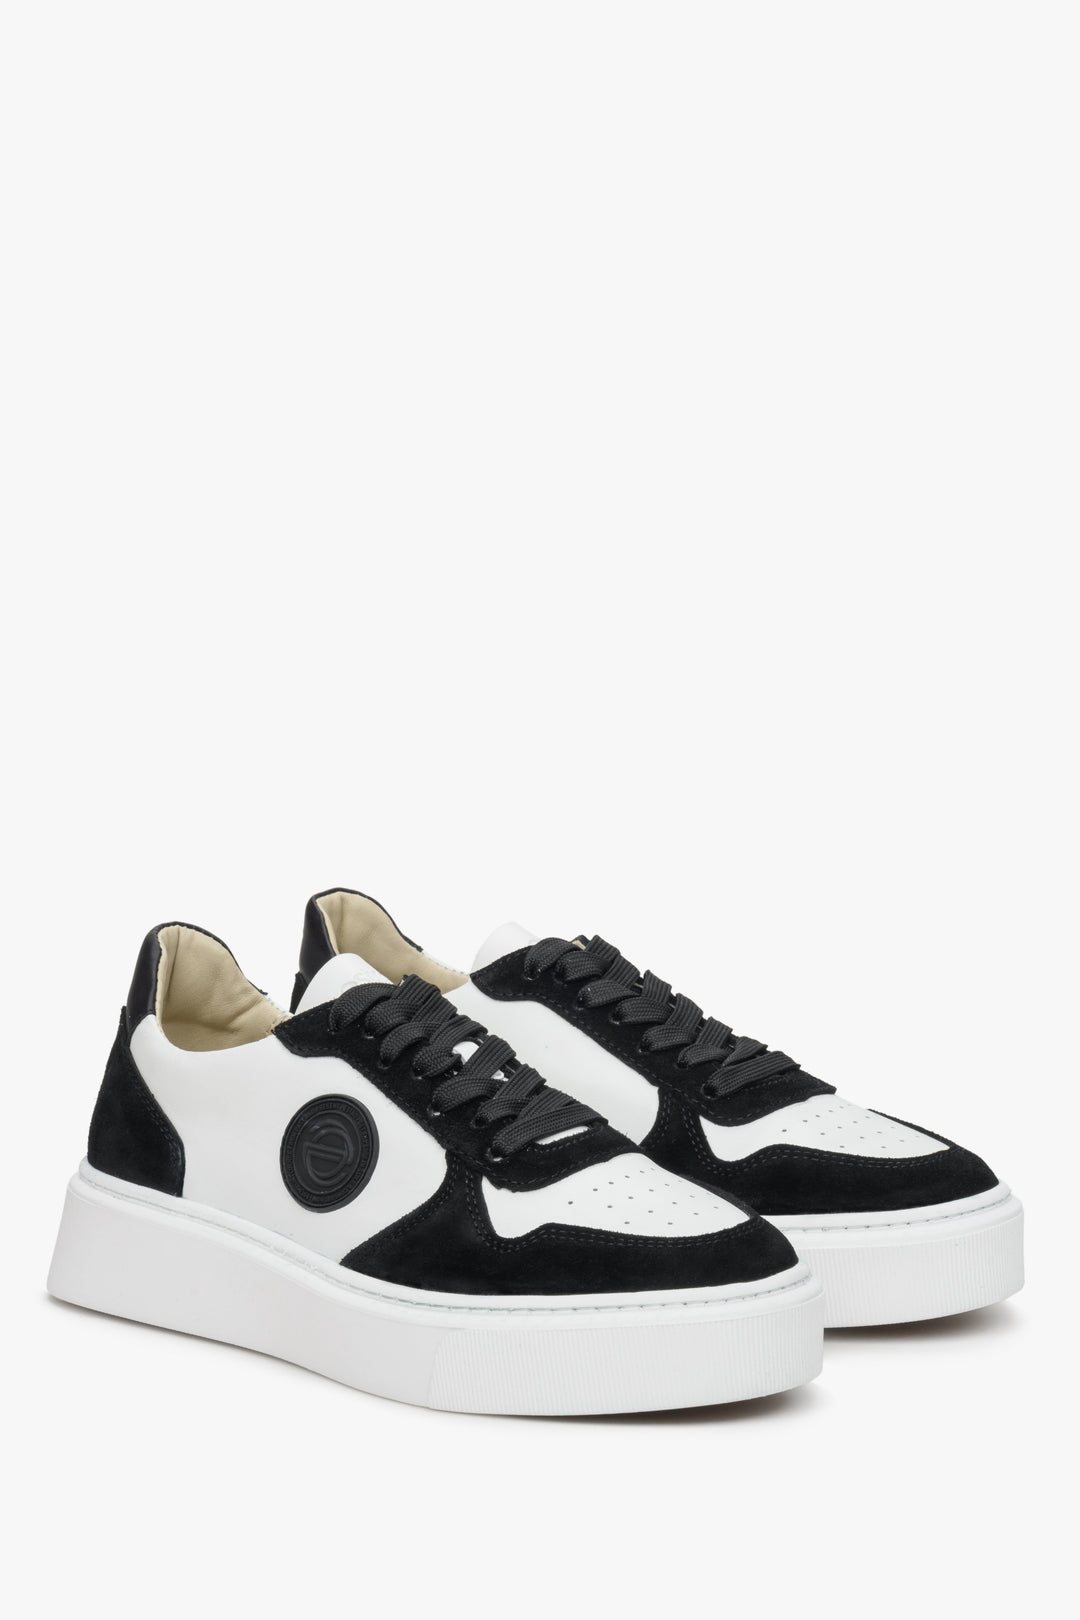 Women's velour and natural leather Estro sneakers with lacing in white and black.